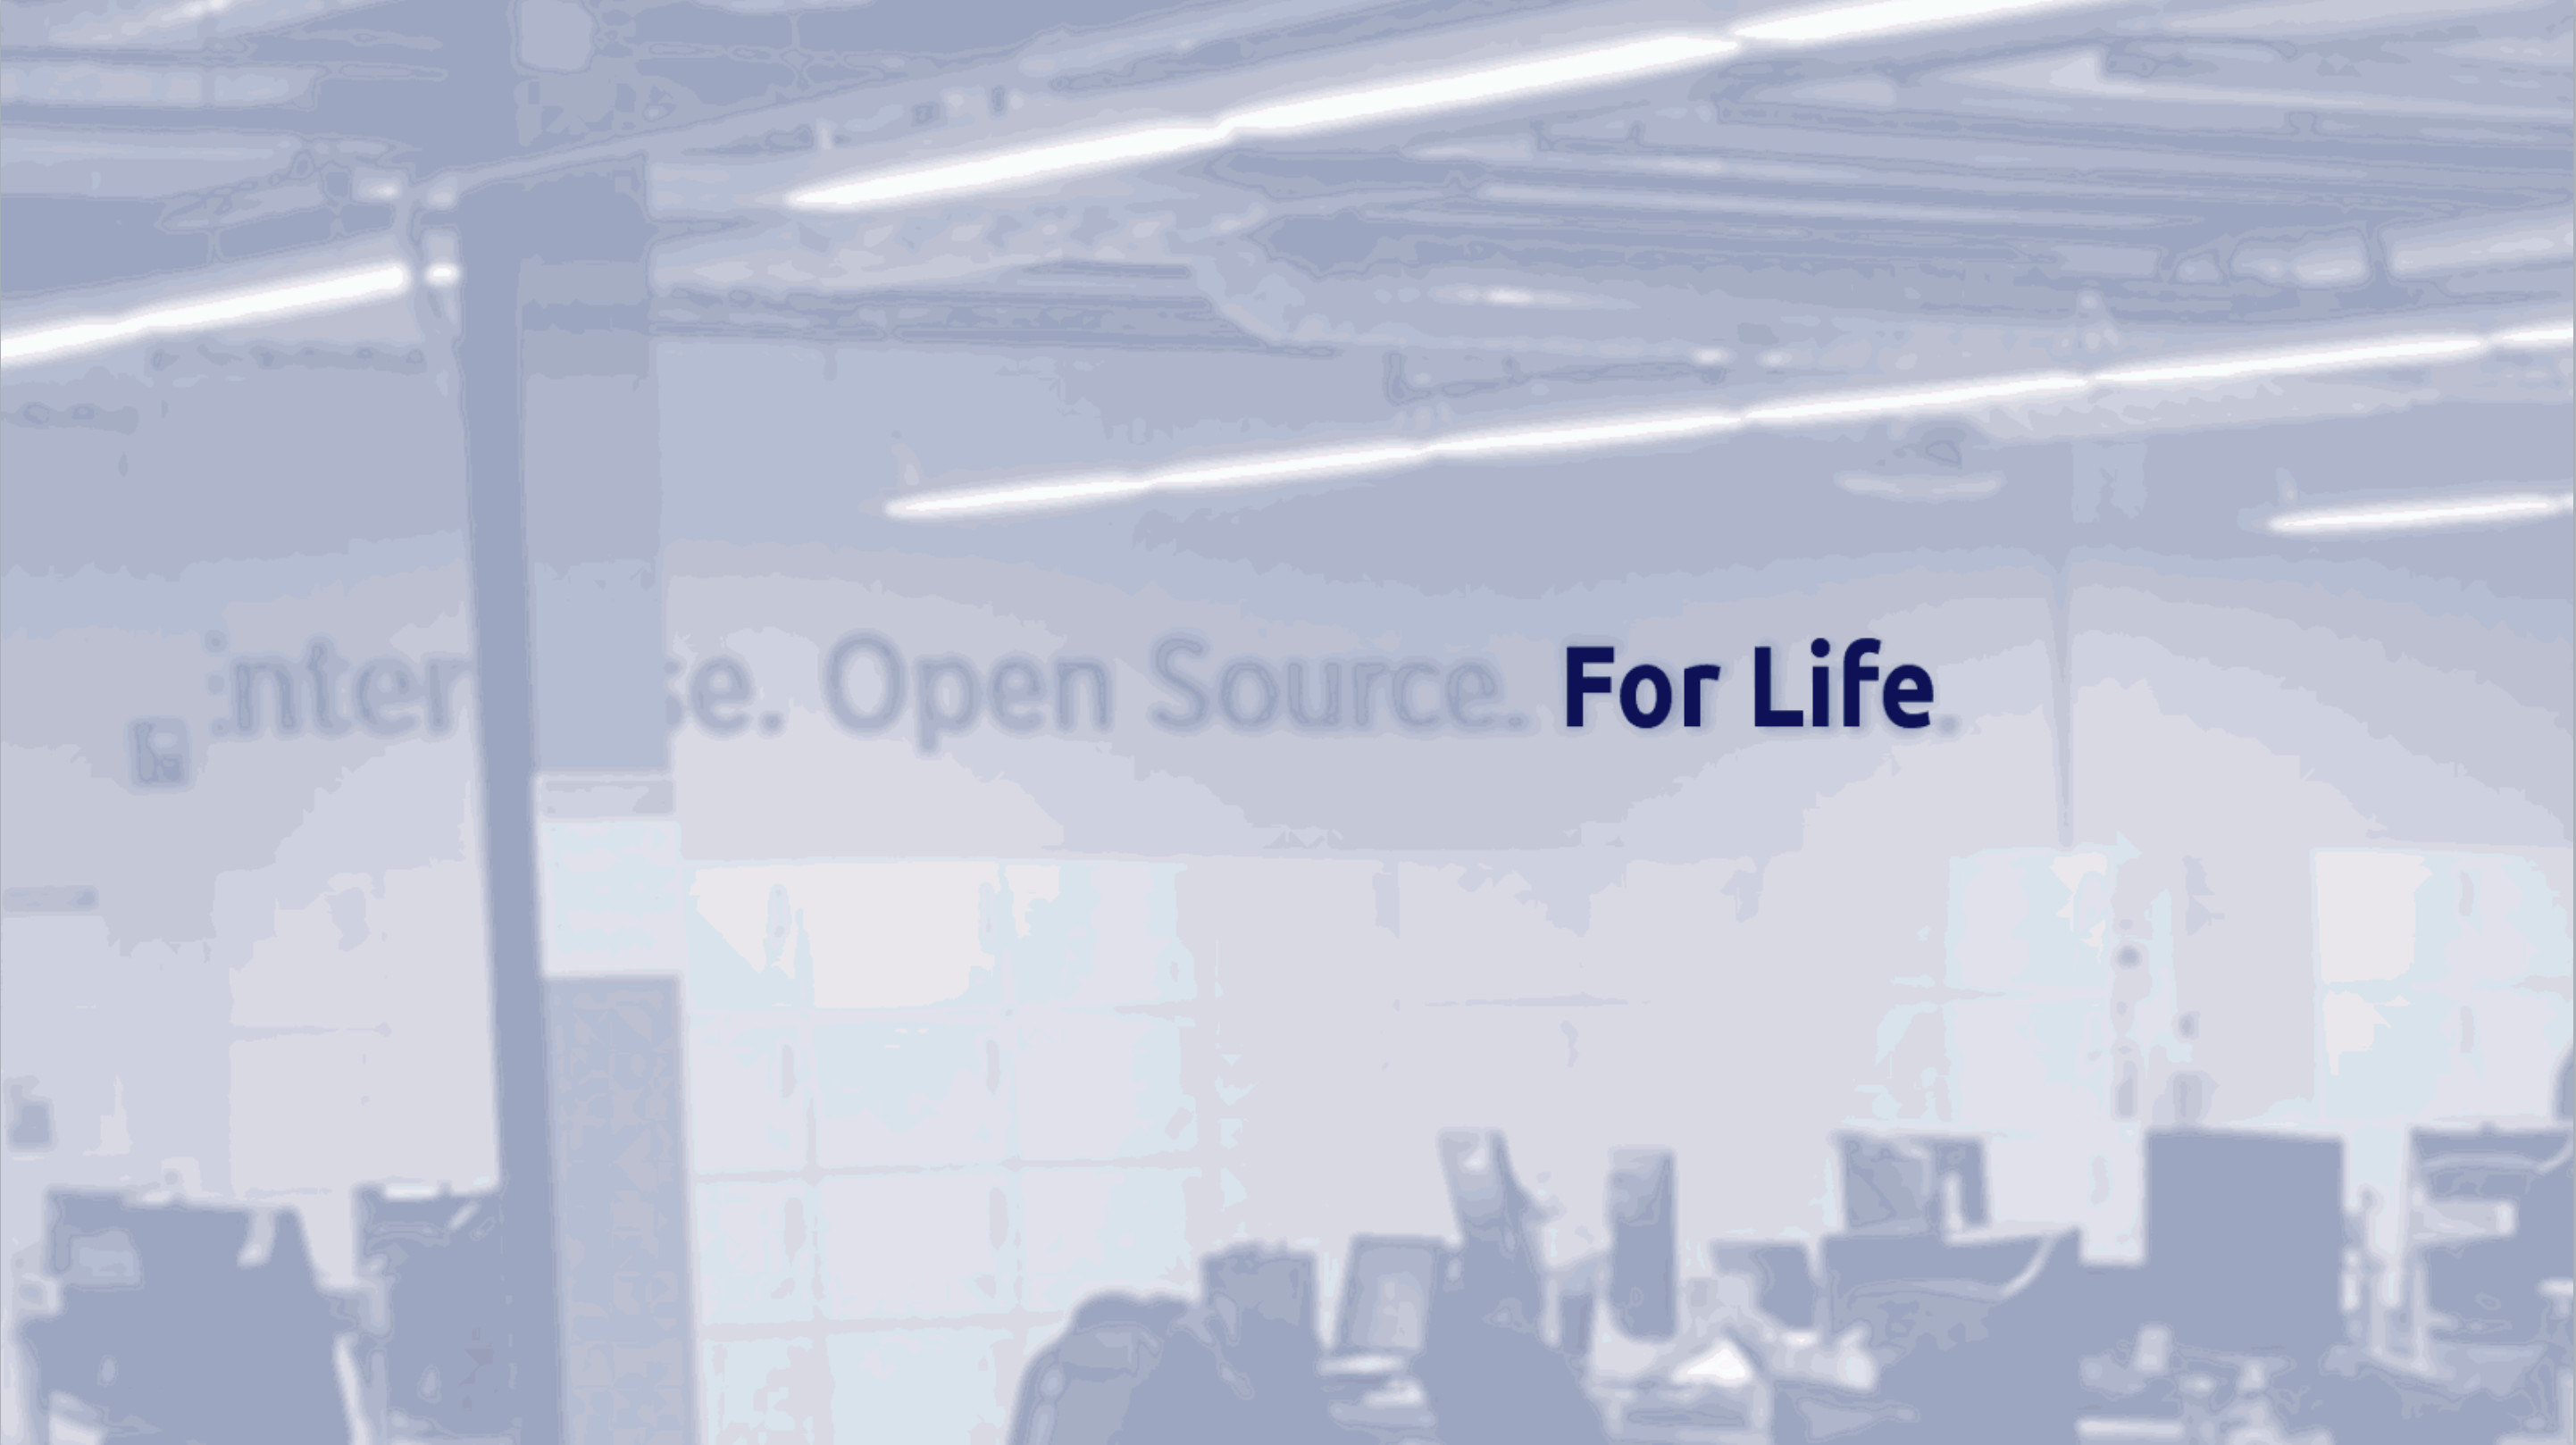 Picture of Liferay's office with “For Life“ sign highlighted